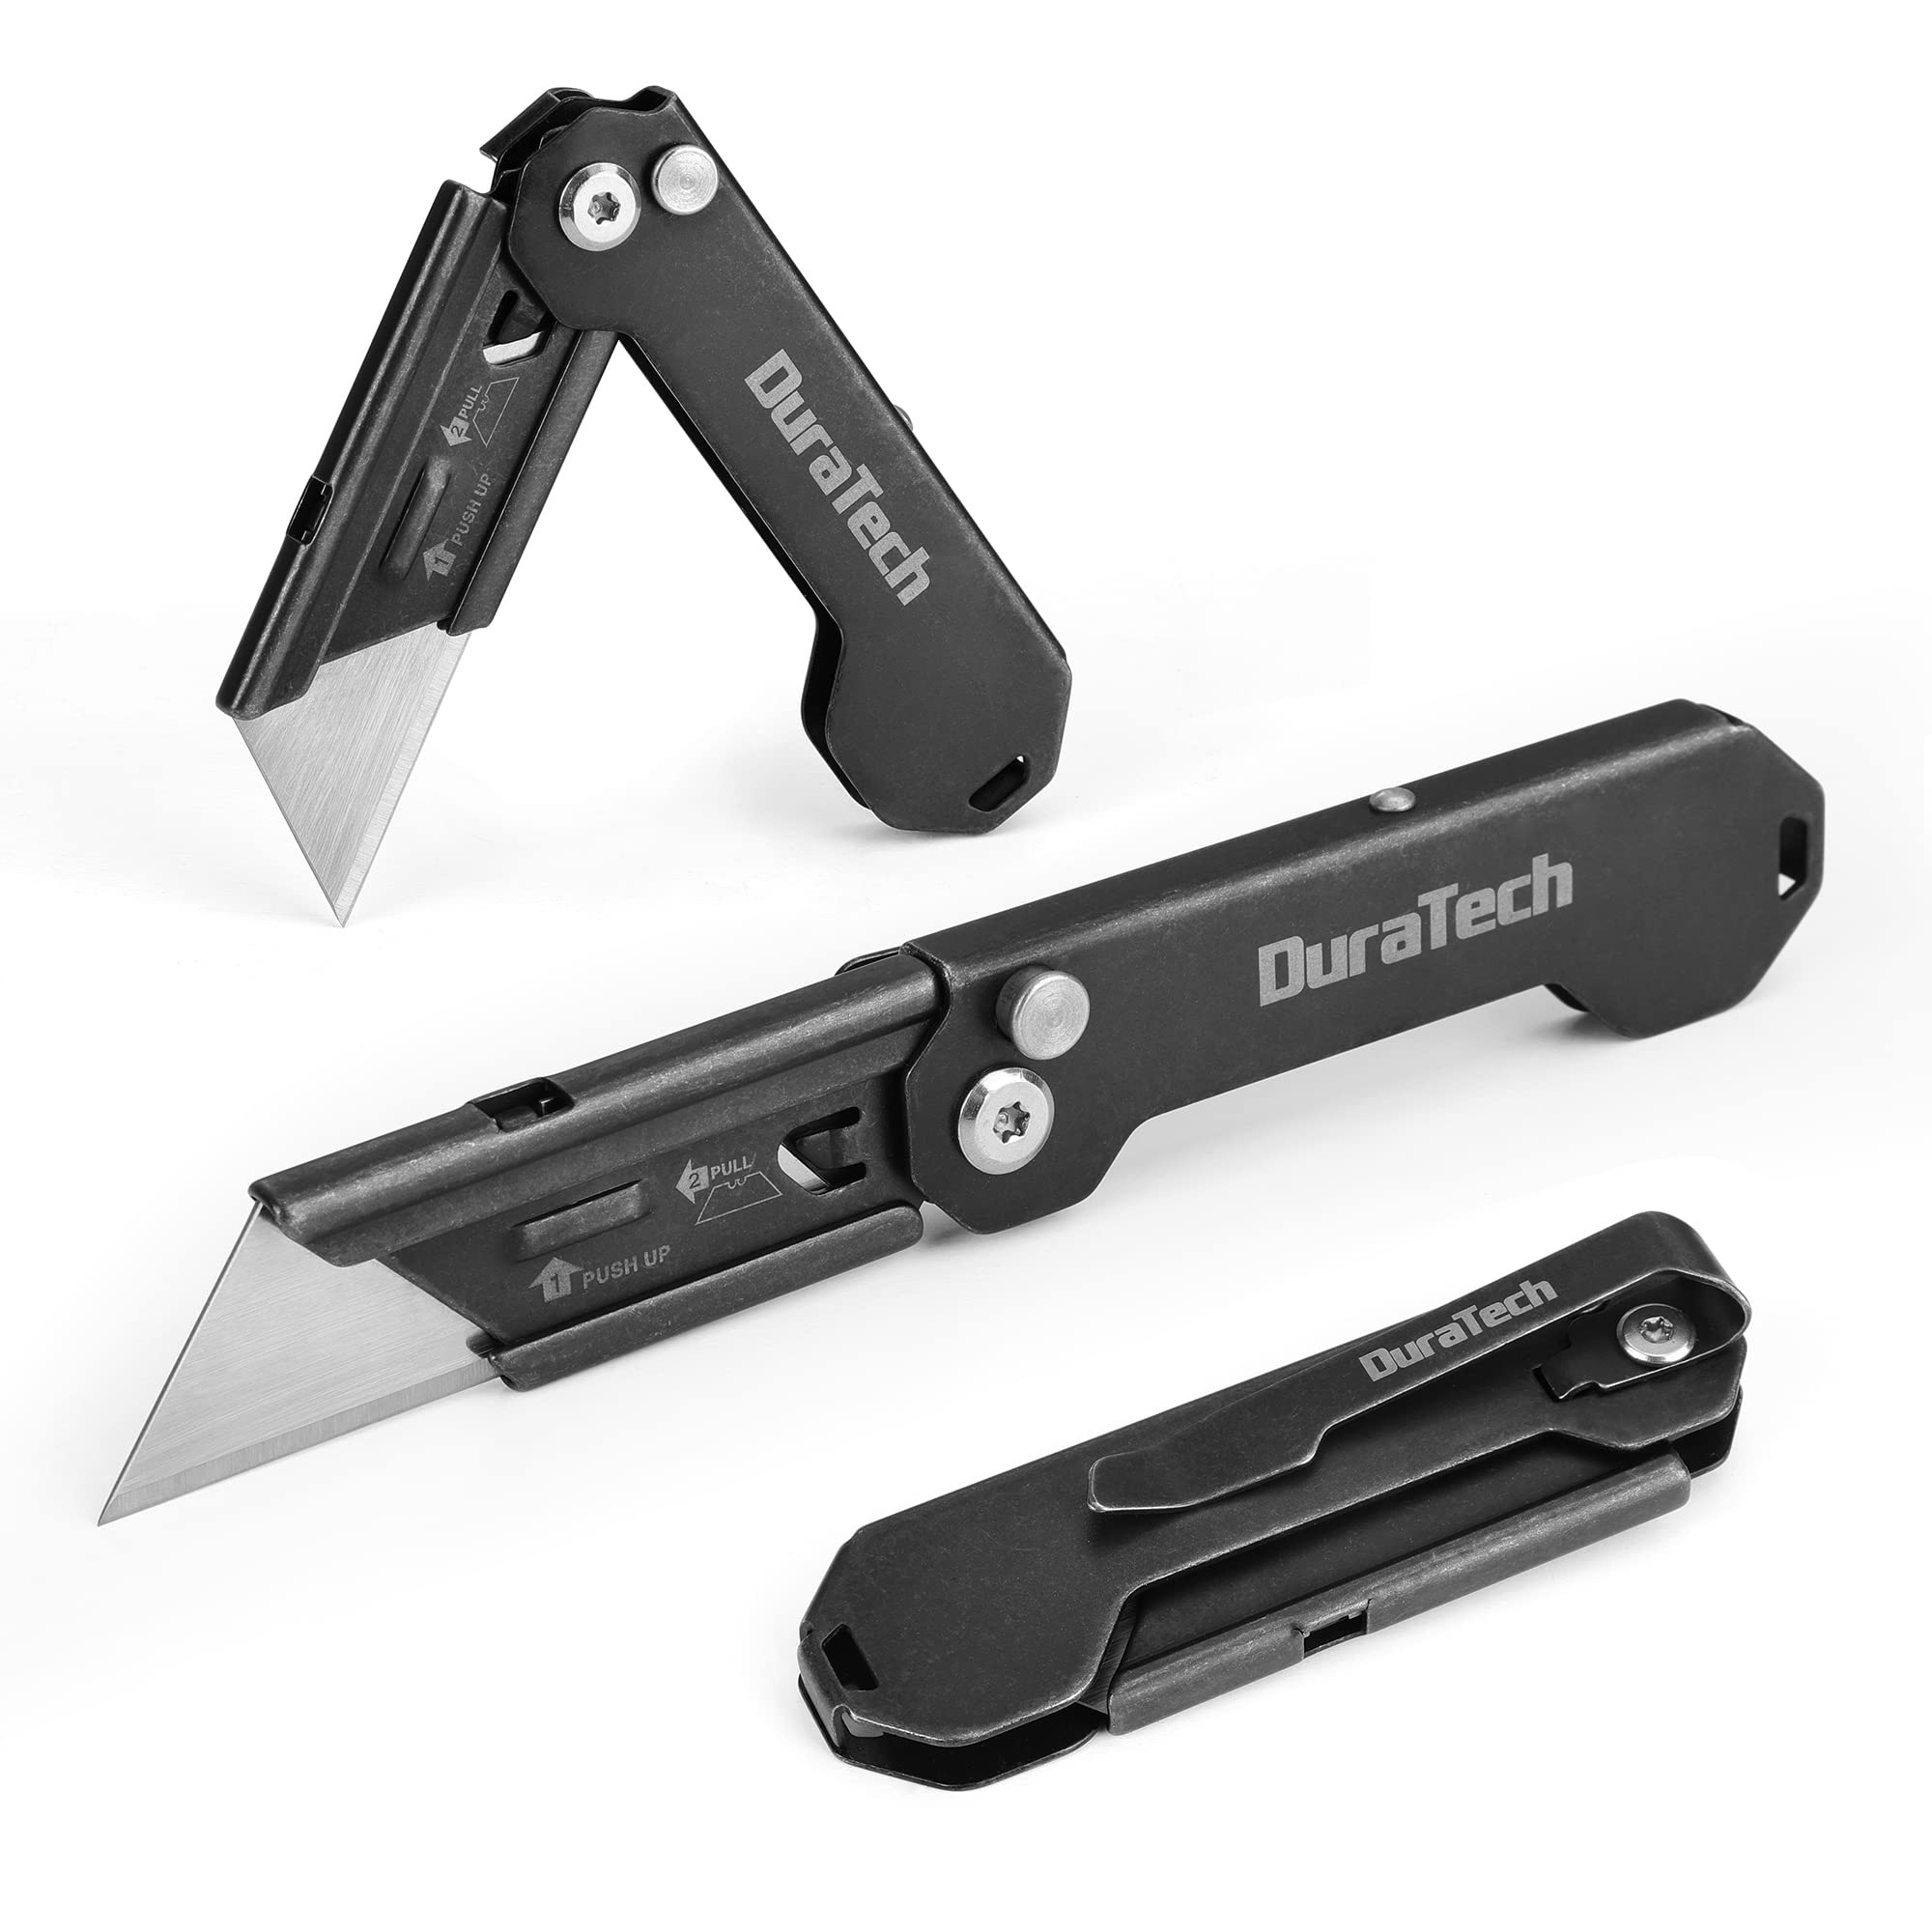 DURATECH 2 Pack Folding Utility Knife Set, EDC Box Cutter with Safety Axis Lock, Belt Clip, Quick-change Blade Mechanism, Full Stainless Steel Body and SK5 Sharp Blade, Small Pocket Razor Knife Set